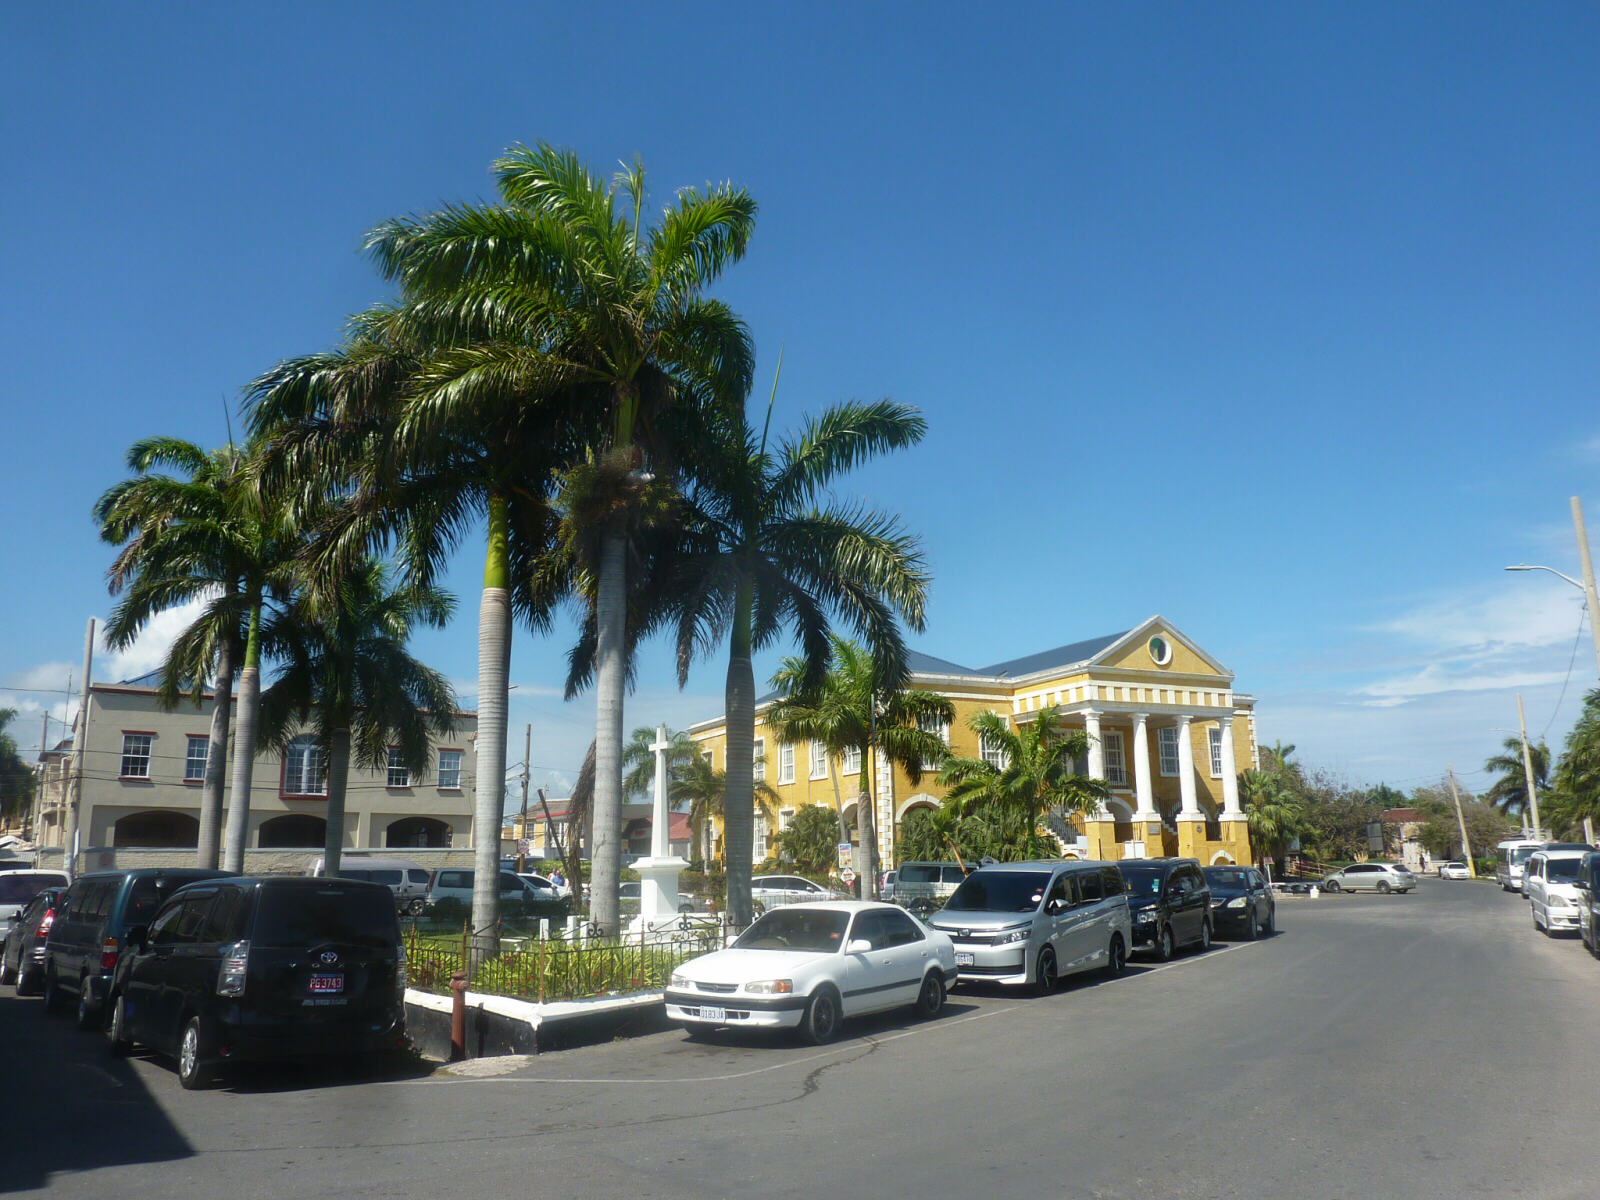 The town hall in Falmouth old town, Jamaica